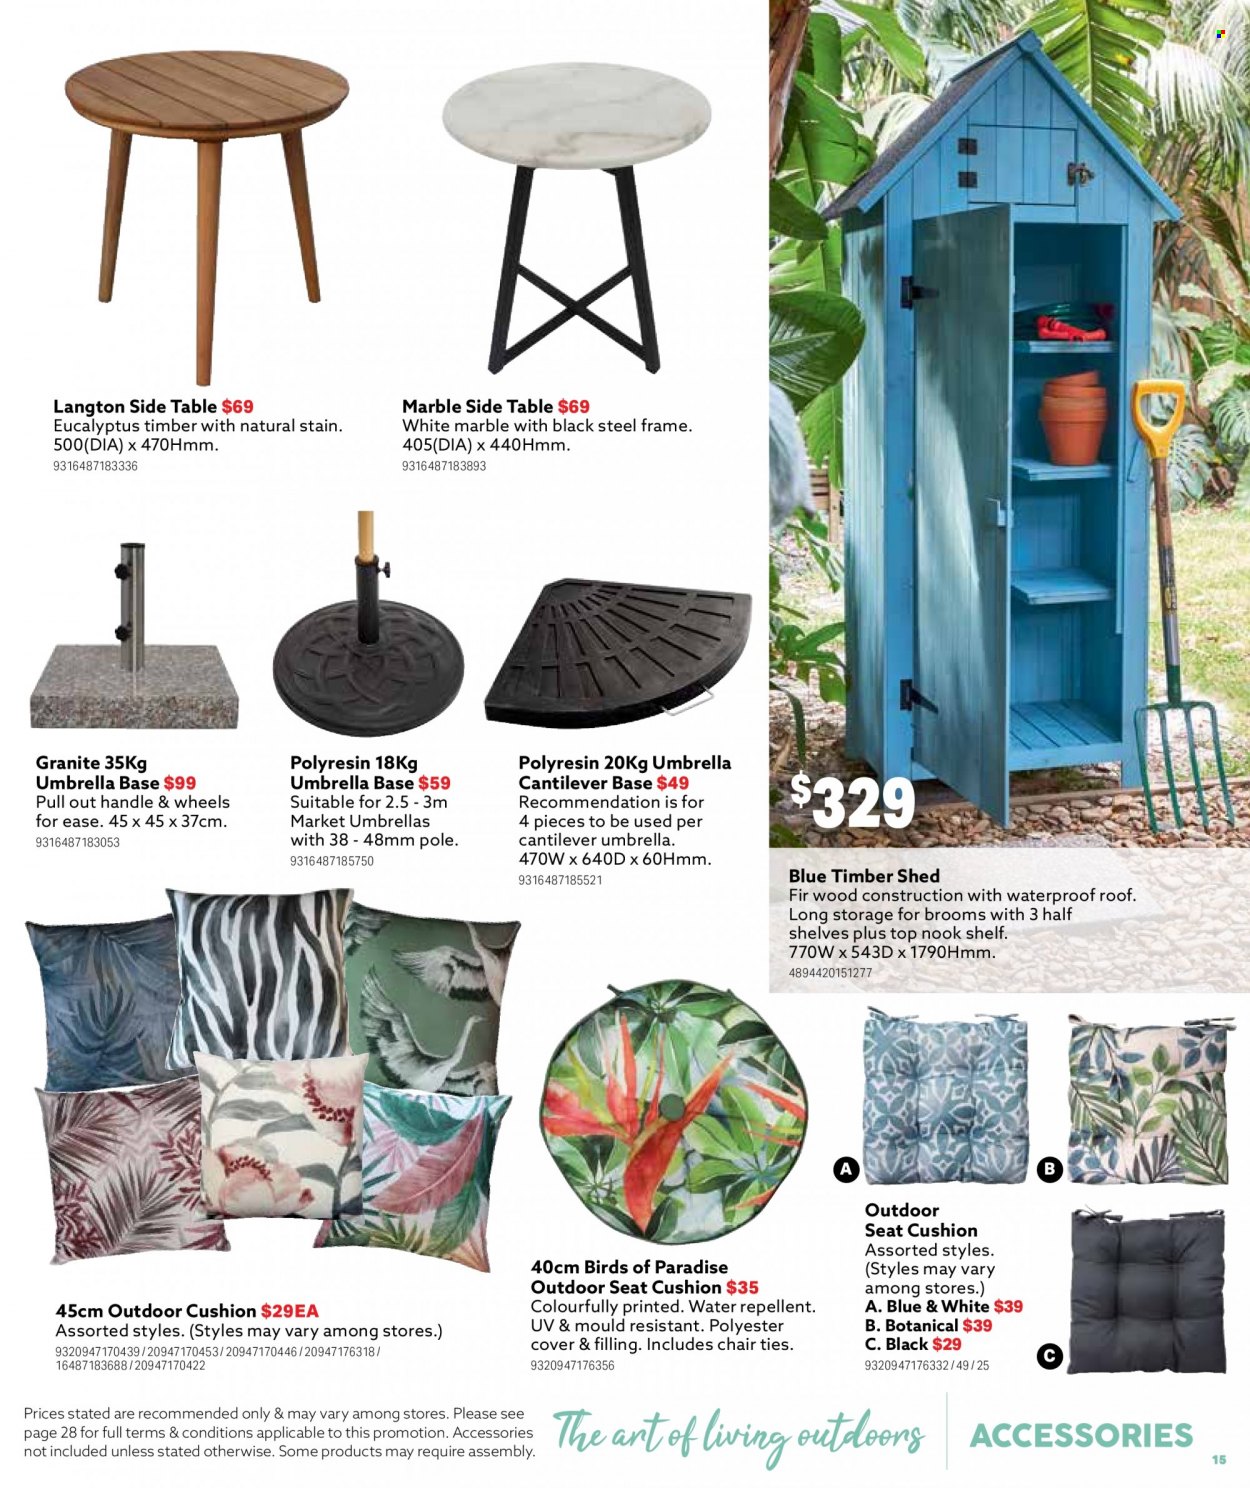 thumbnail - Mitre 10 Catalogue - 14 Sep 2022 - 31 Dec 2022 - Sales products - cushion, table, chair, sidetable, shed, umbrella. Page 15.